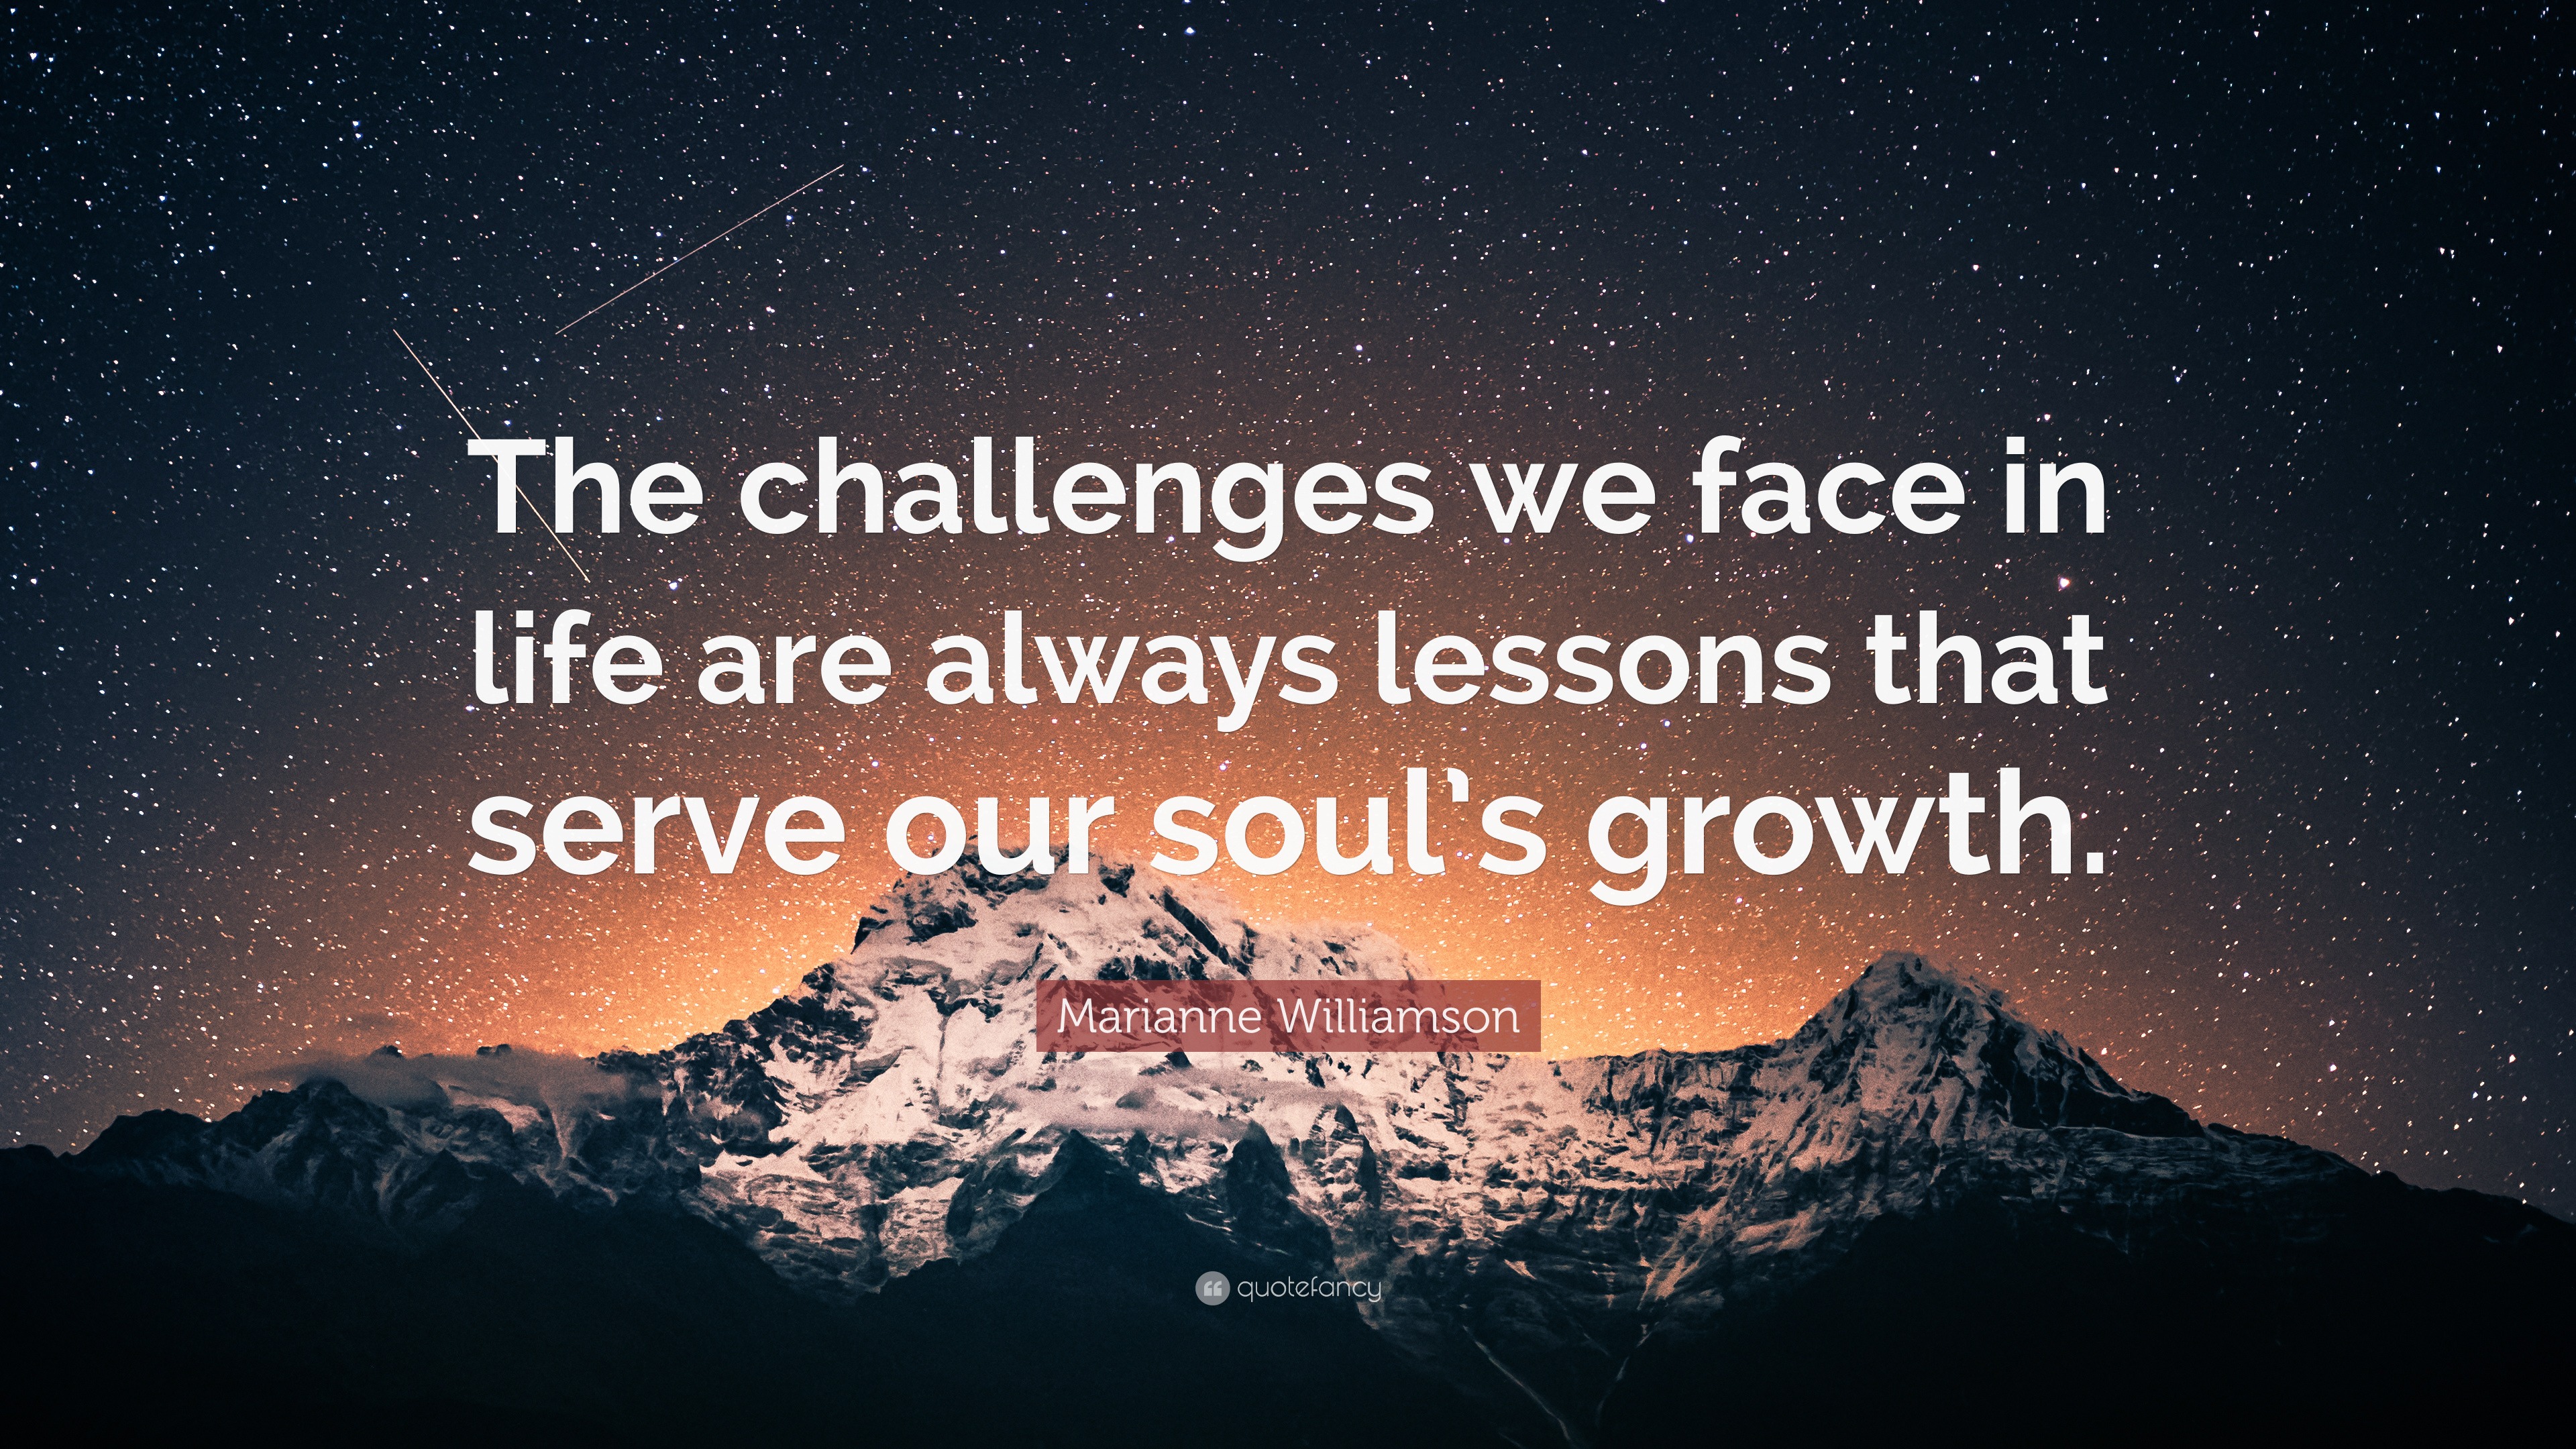 Marianne Williamson Quote: “The challenges we face in life are always